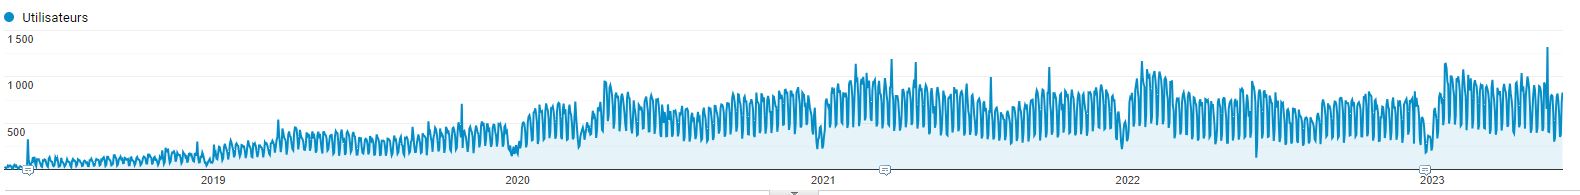 Organic traffic on our website